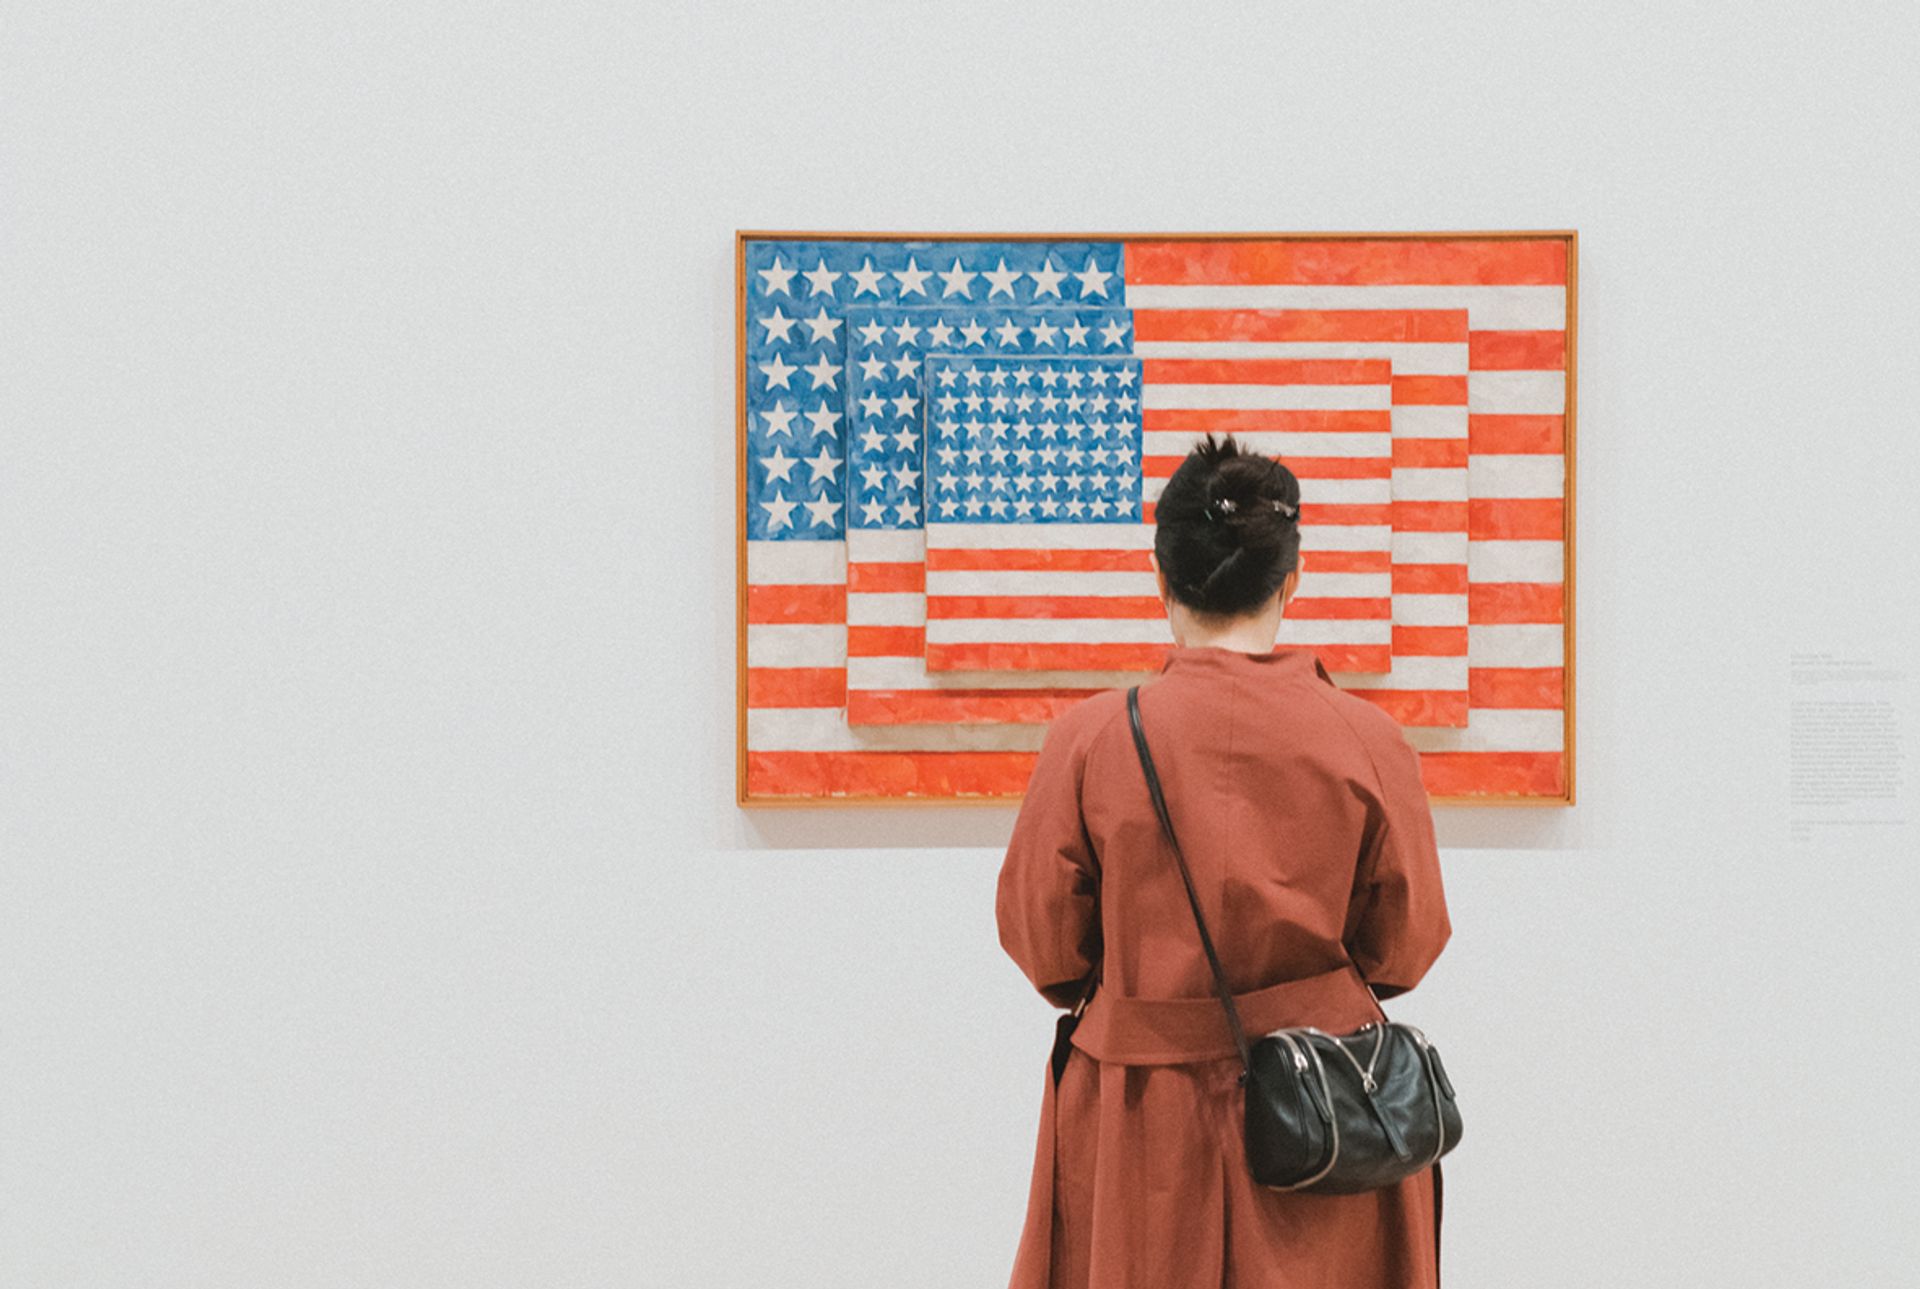 Jasper Johns’s iconic Three Flags (1958) is currently on show in the exhibition Jasper Johns: Mind/Mirror at the Whitney Museum of American Art, New York Photo: Ryan Lowry; © 2021 Jasper Johns/VAGA at Artists Rights Society (ARS), New York